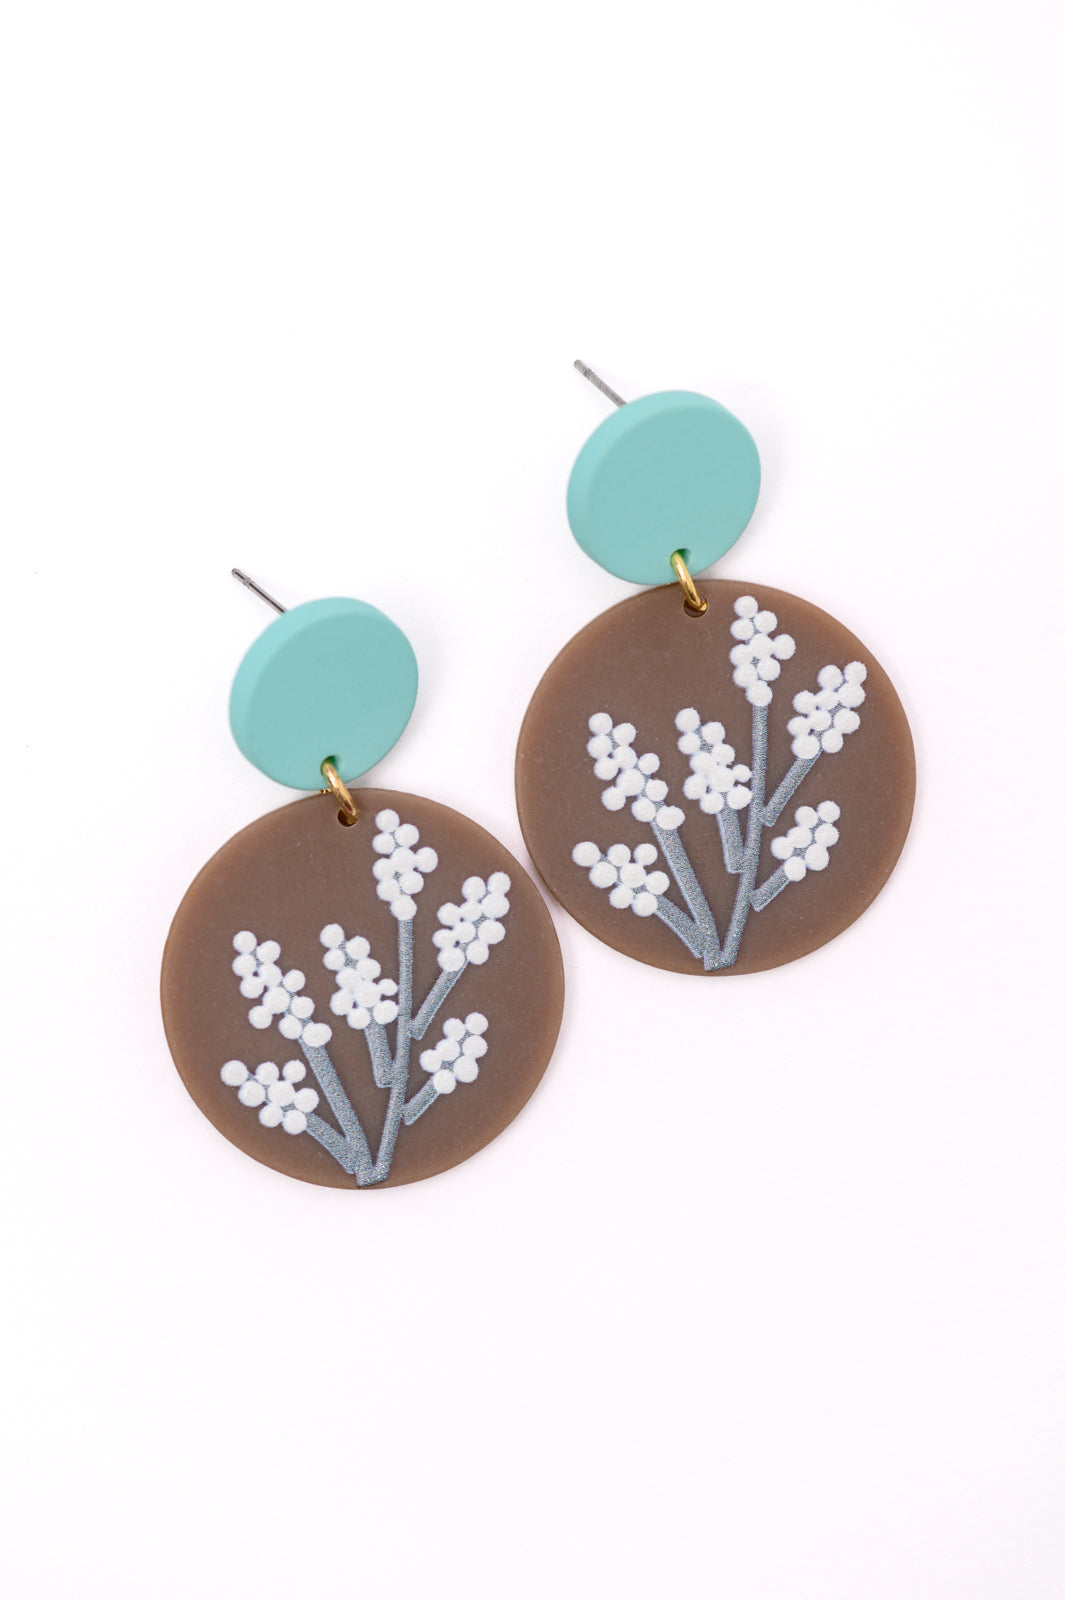 Babies Breath Earrings-Womens-Ave Shops-Happy Campers Boutique, Women's Fashion and More in Plainwell, MI